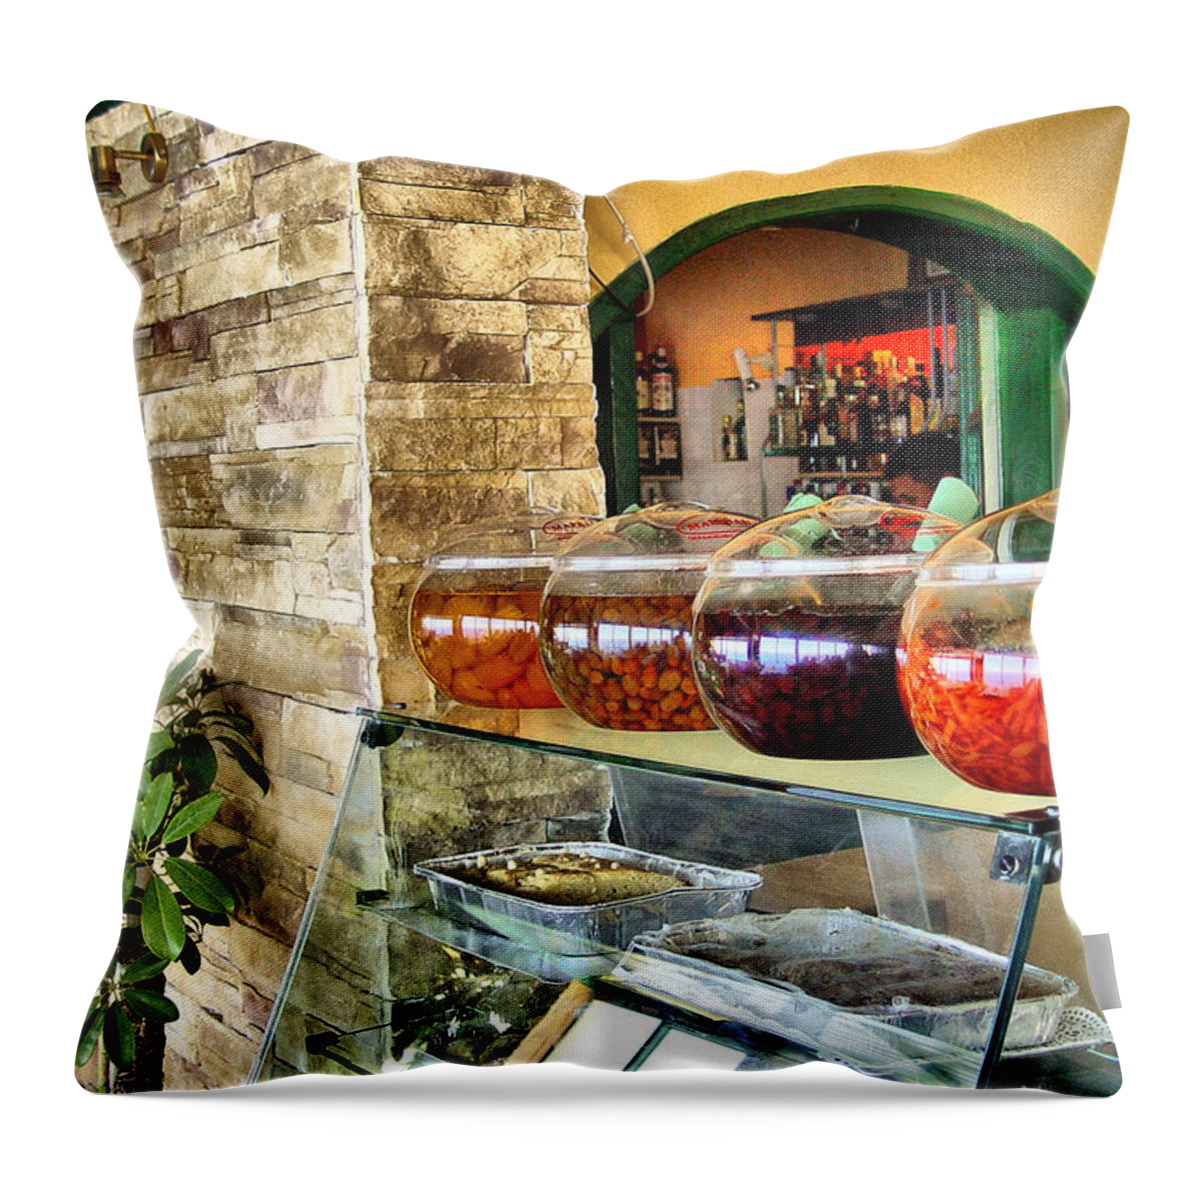 Olives Throw Pillow featuring the photograph Greek Isle Restaurant Still Life by Mitchell R Grosky